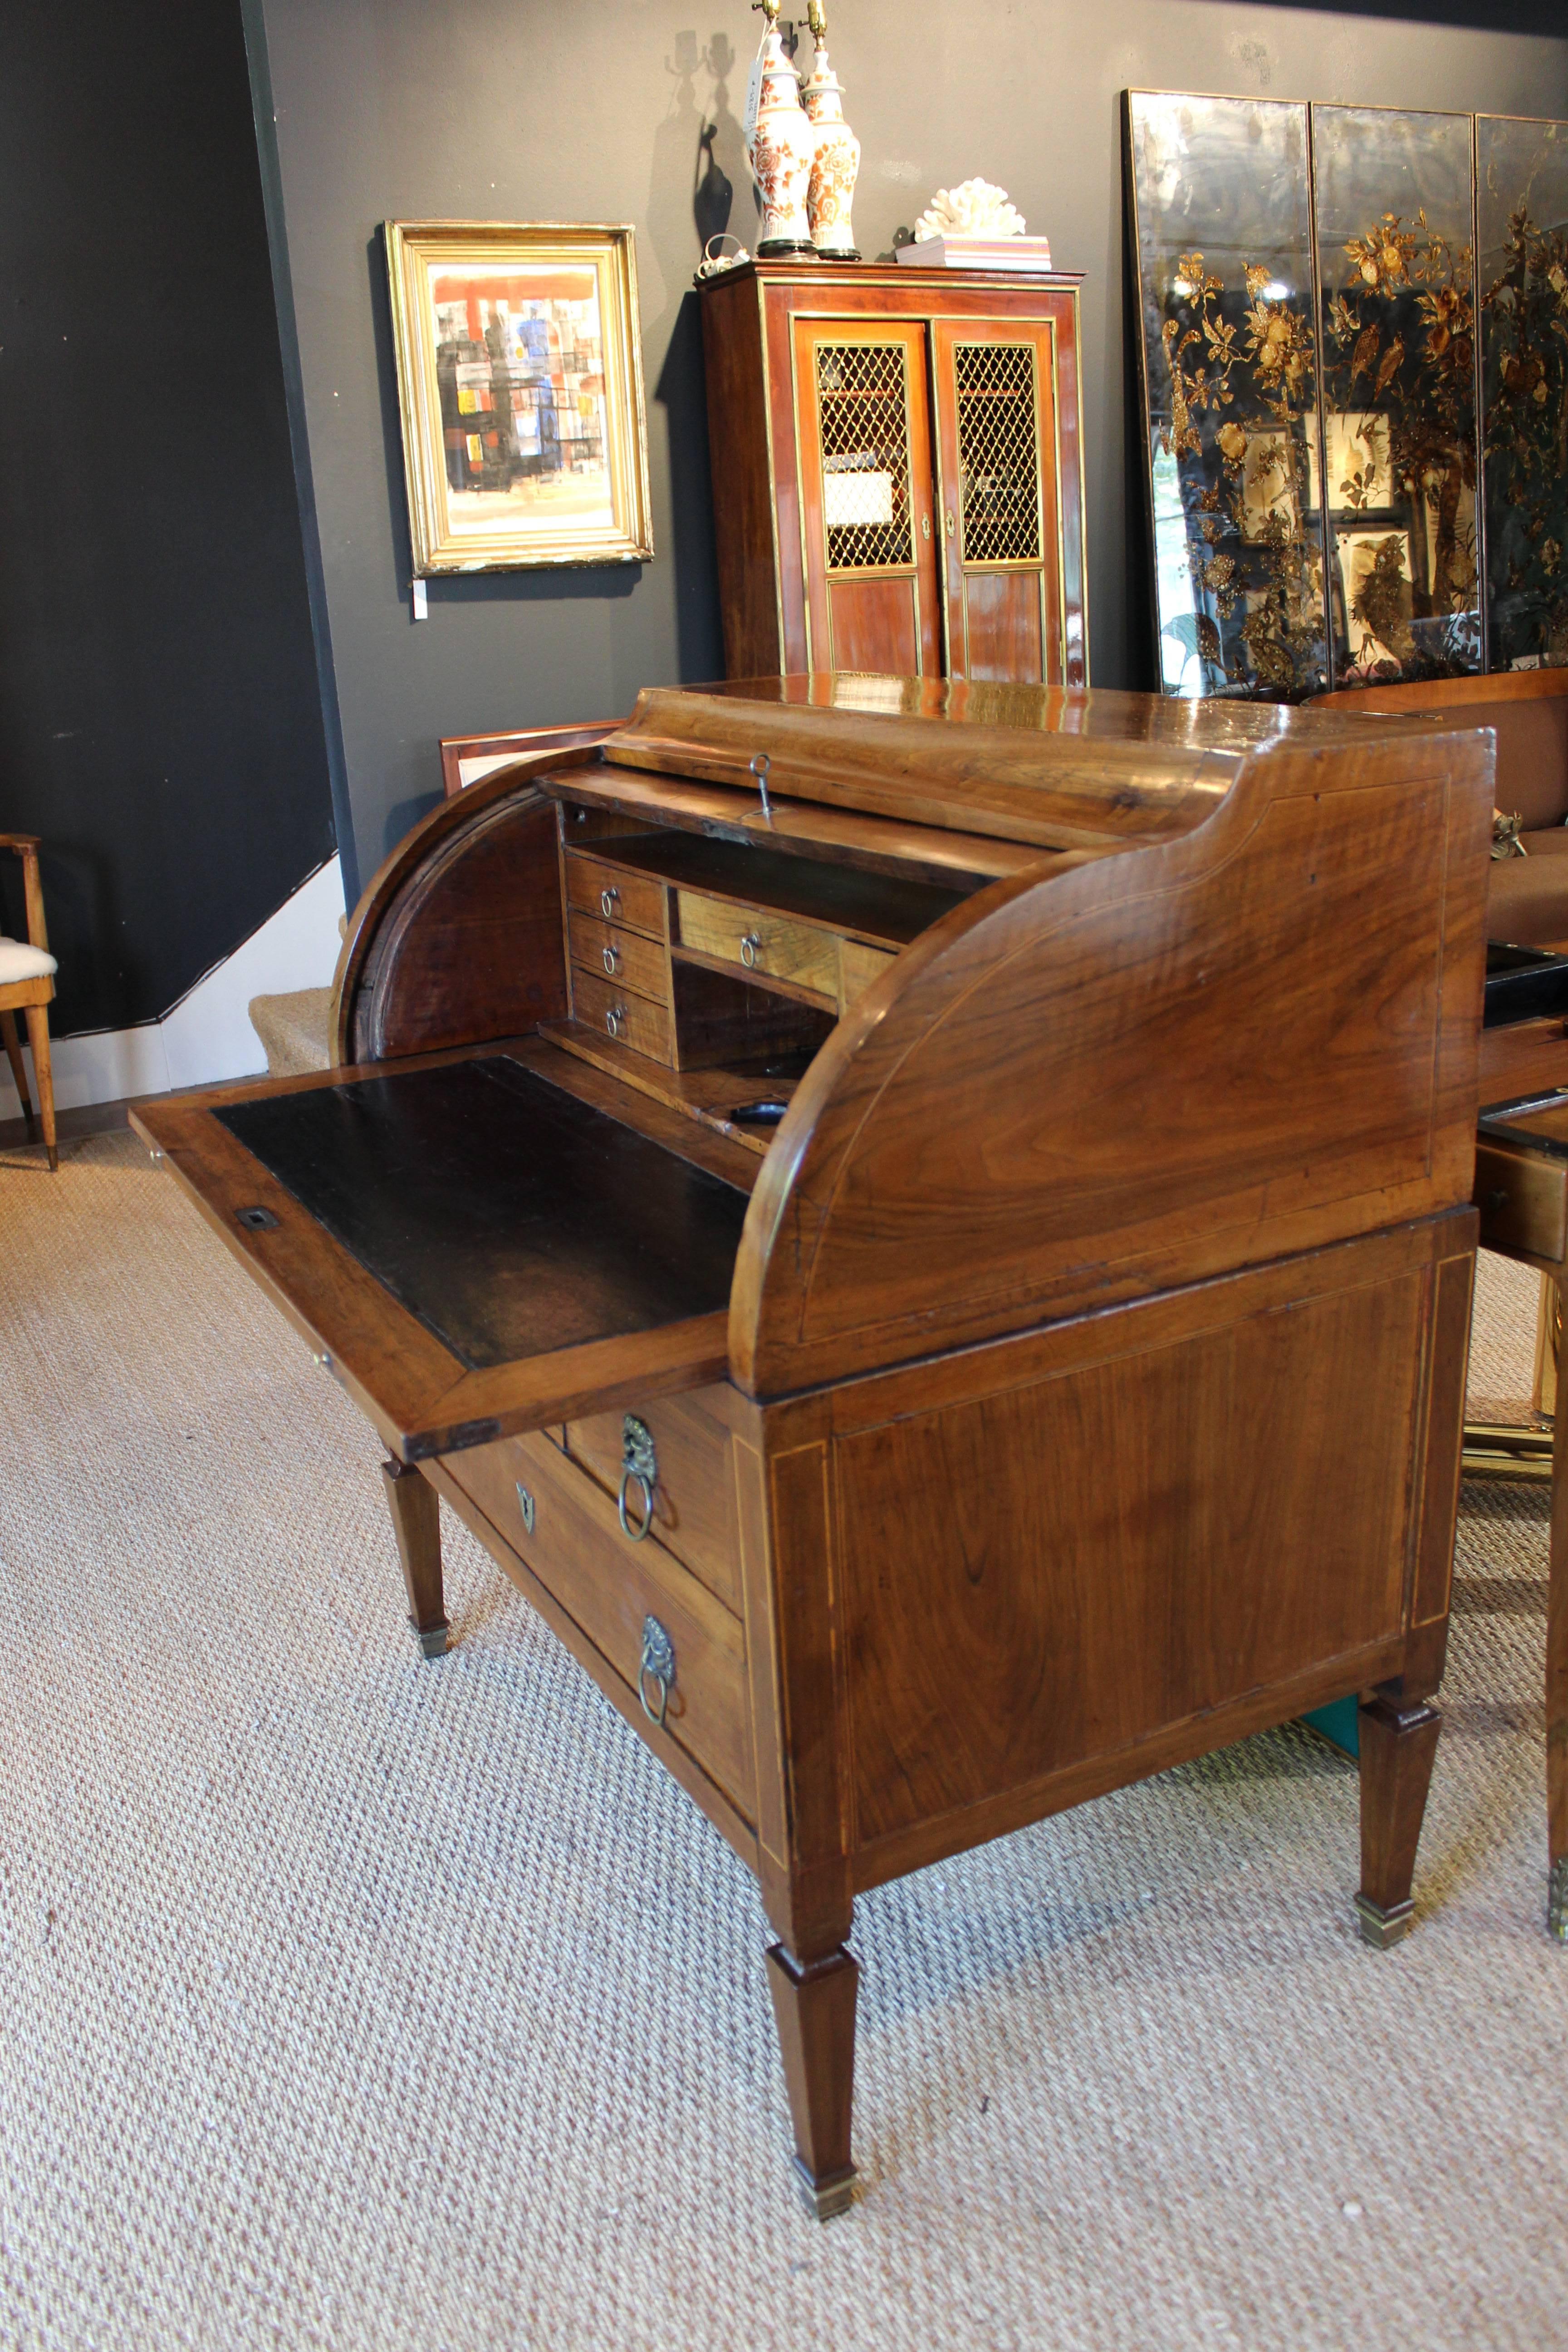 Stunning two-piece hooded bureau secretary desk with slide-out black leather writing surface and original Lionhead drawer pulls. Center console includes inkwell holder and secret compartment that drops to the faux middle drawer on bottom. Bronze